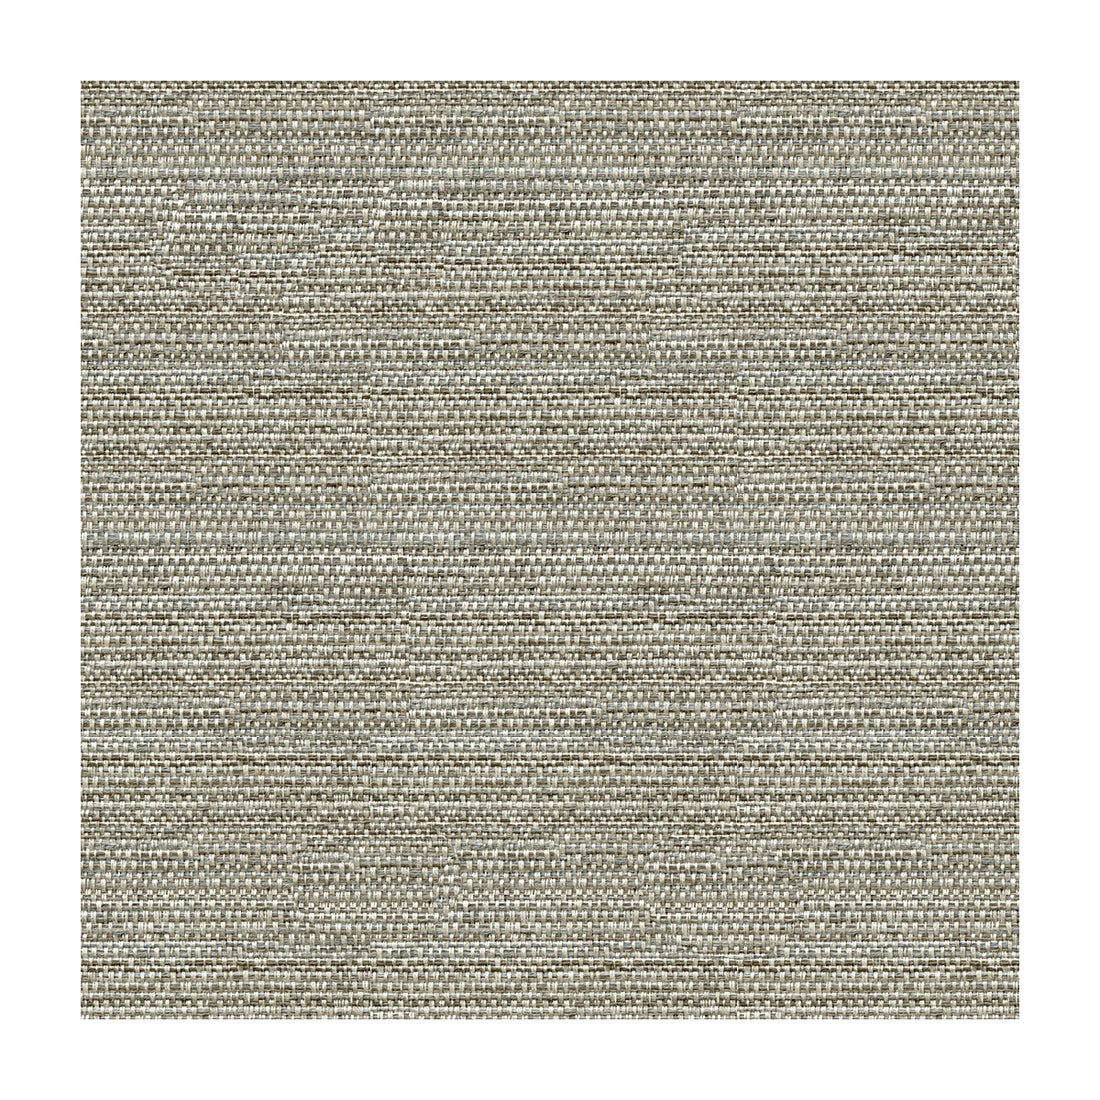 Kravet Couture fabric in 31695-11 color - pattern 31695.11.0 - by Kravet Couture